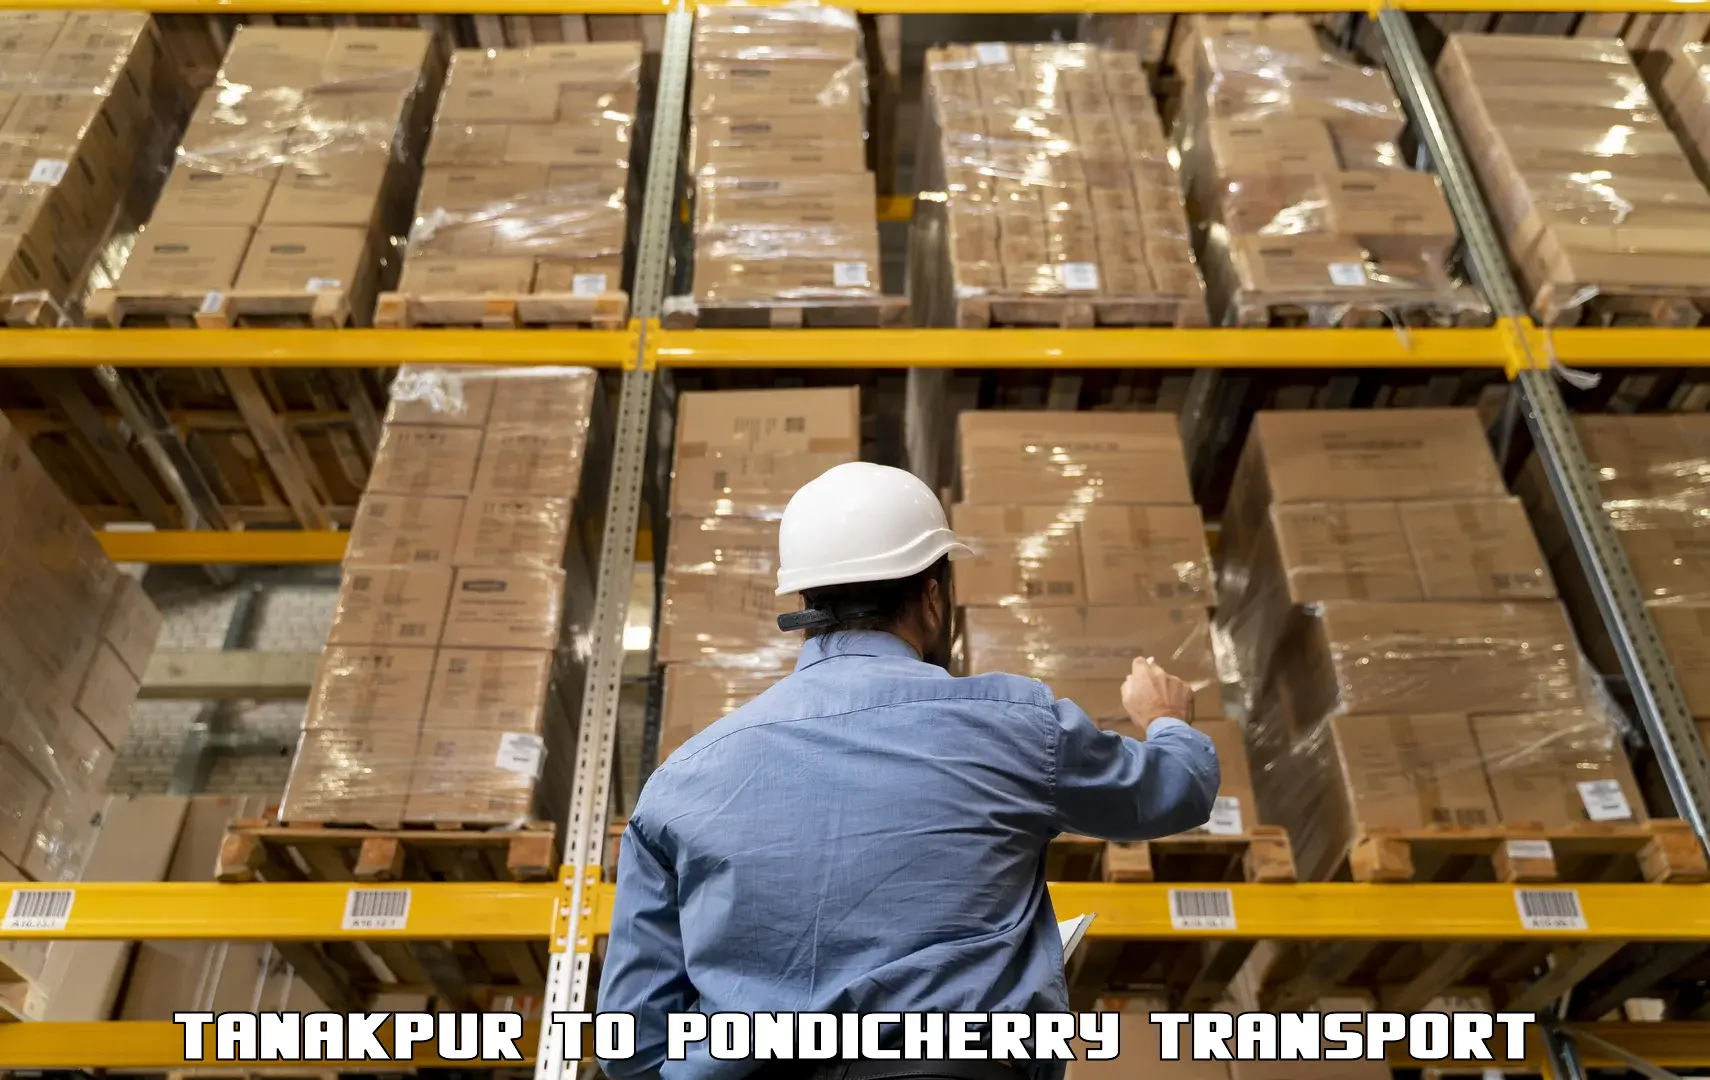 Part load transport service in India Tanakpur to Pondicherry